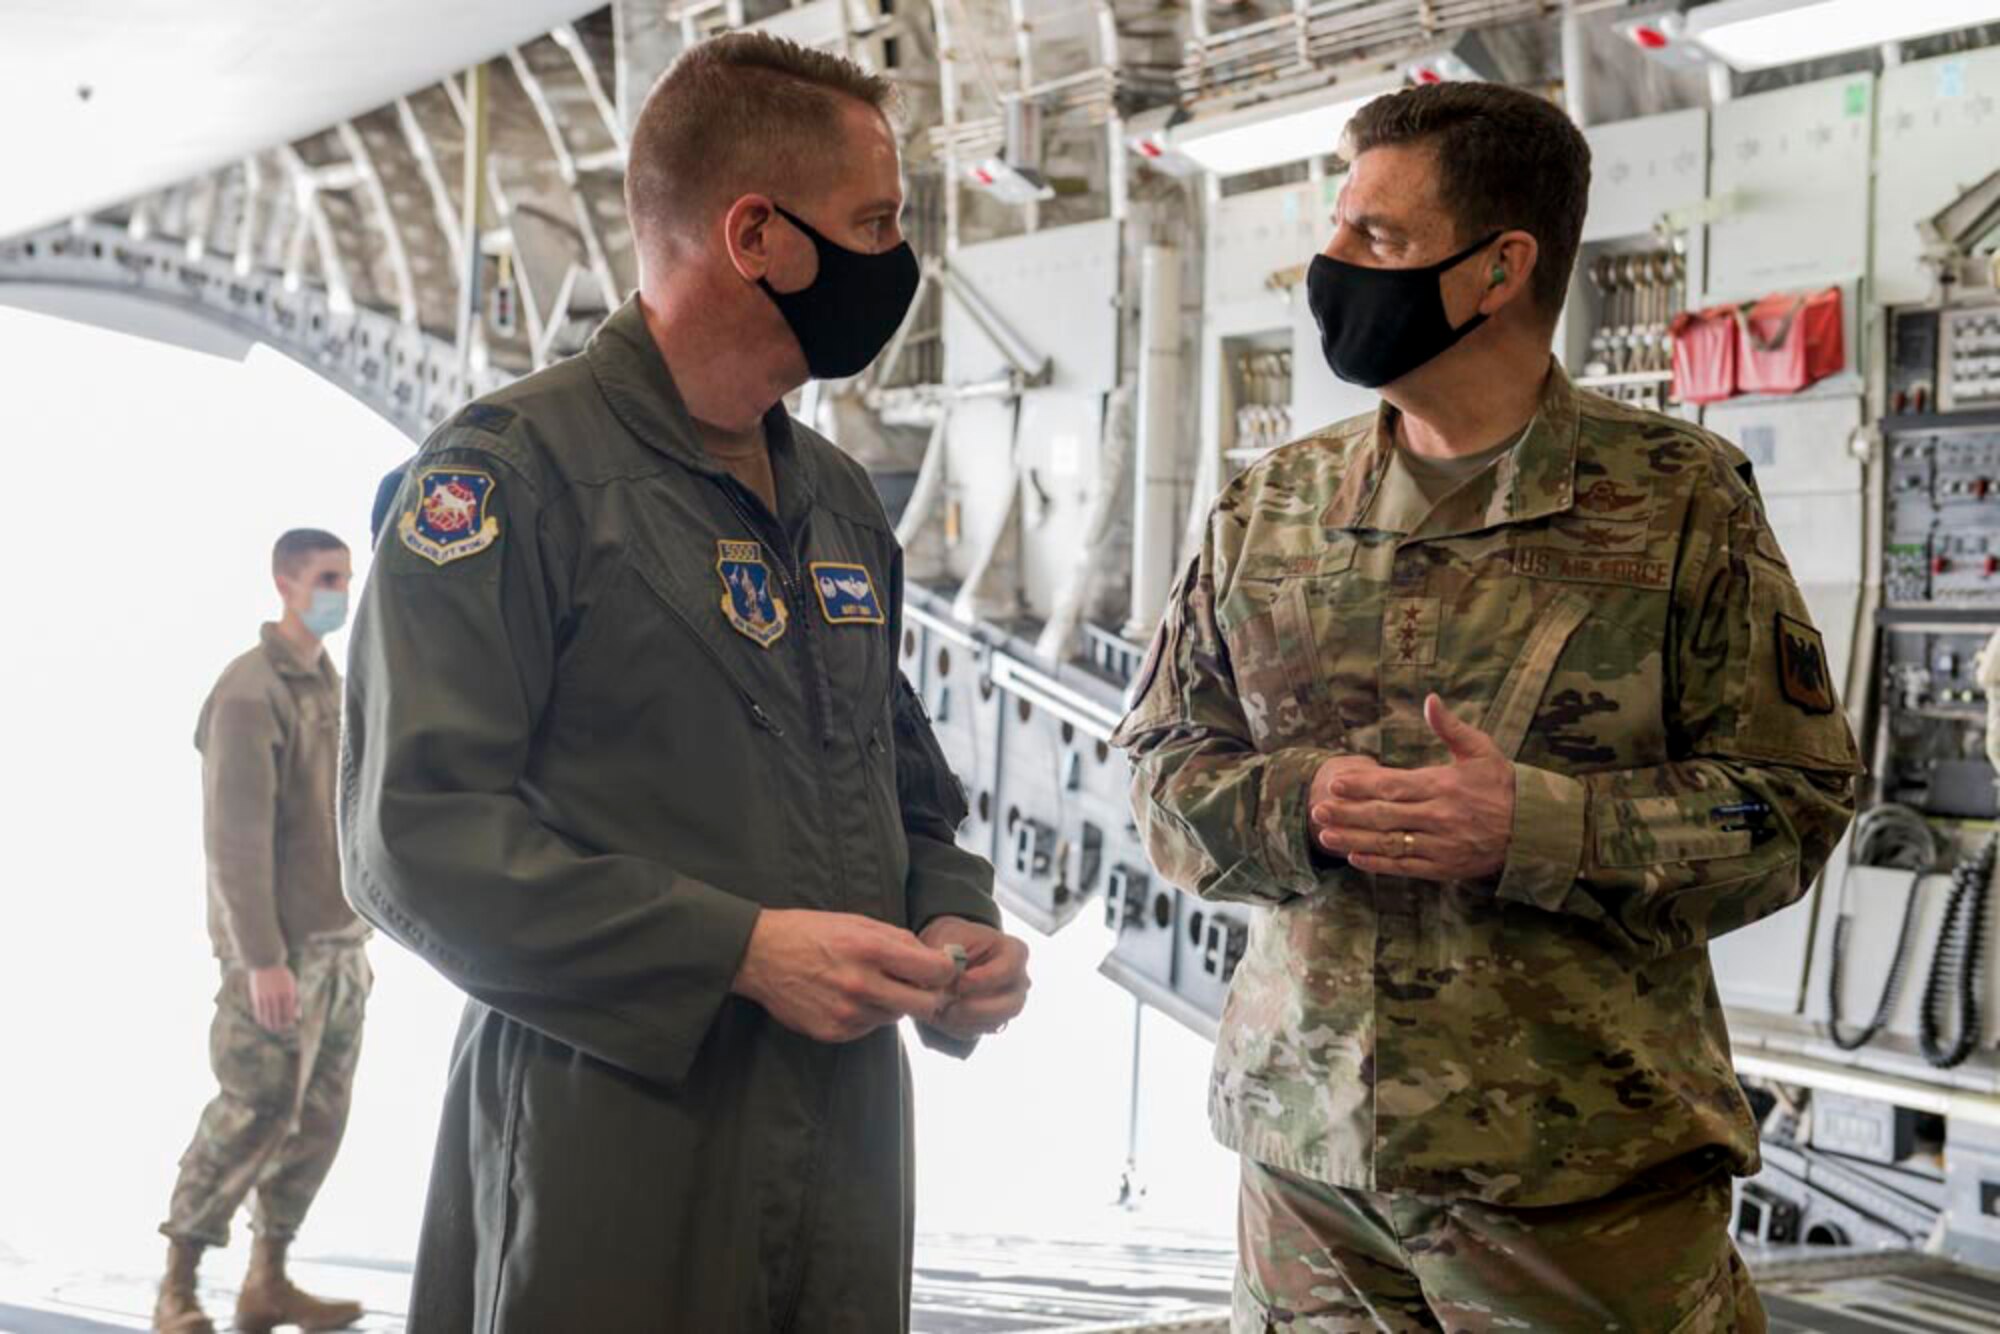 U.S. Air Force Col. Marty Timko, left, wing commander, 167th Airlift Wing, West Virginia National Guard, and Lt. Gen. Michael A. Loh, director, Air National Guard, speak in the cargo area of a C-17 Globemaster III aircraft during Loh’s visit at Shepherd Field Air National Guard Base in Martinsburg, West Virginia, March 9, 2021. During his visit, Loh received updates on the unit’s current operations and response to the COVID-19 pandemic